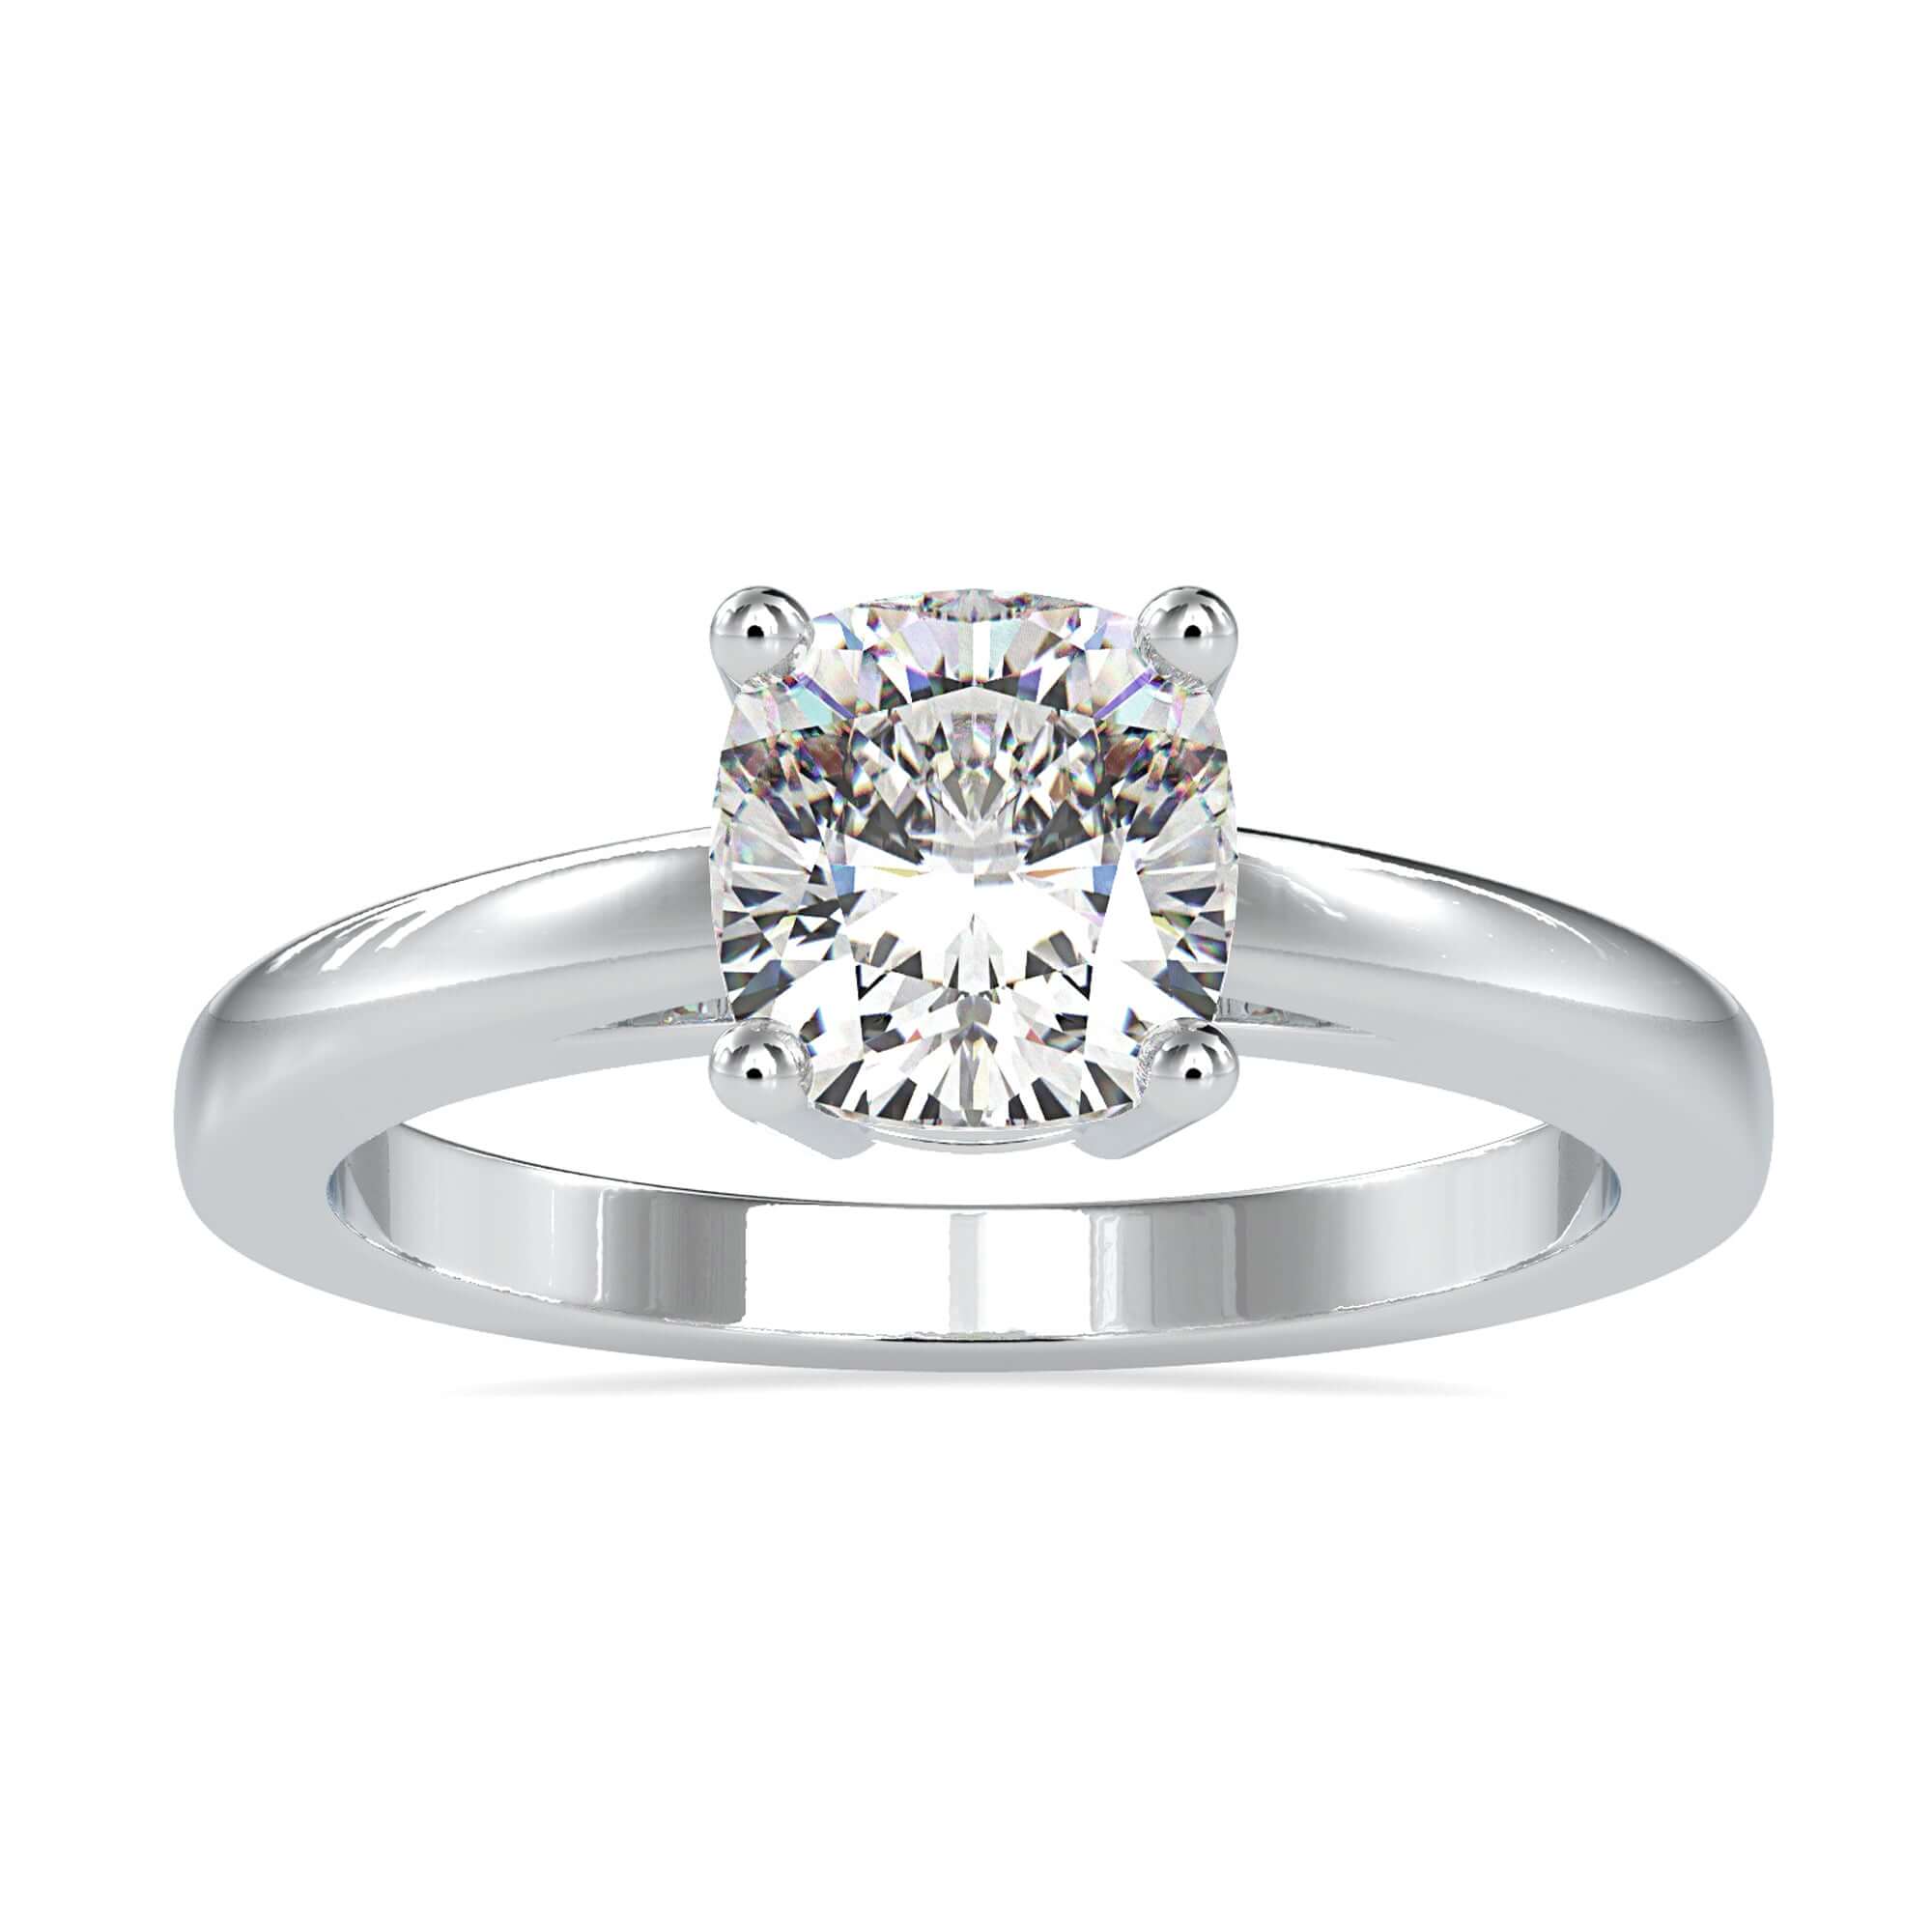 1.40 CT Cushion Cut Colorless Moissanite Solitaire Engagement Ring